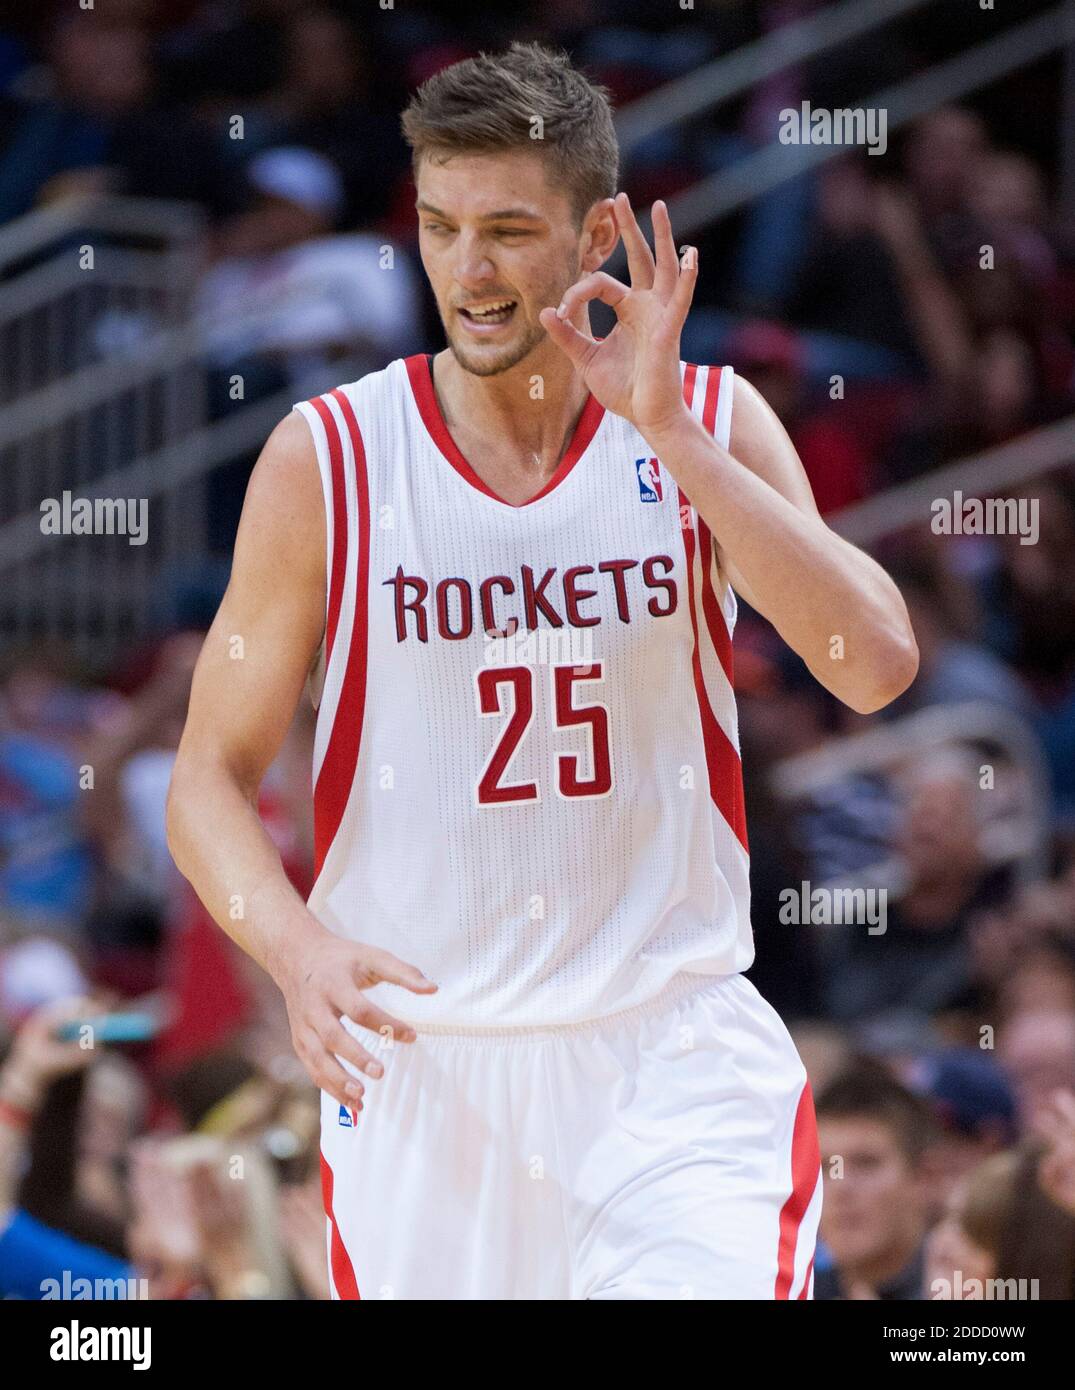 NO FILM, NO VIDEO, NO TV, NO DOCUMENTARY - Chandler Parsons (25) of the Houston  Rockets celebrates making three of his 32 points in the Rockets' 136-103  victory in Houston, TX, USA